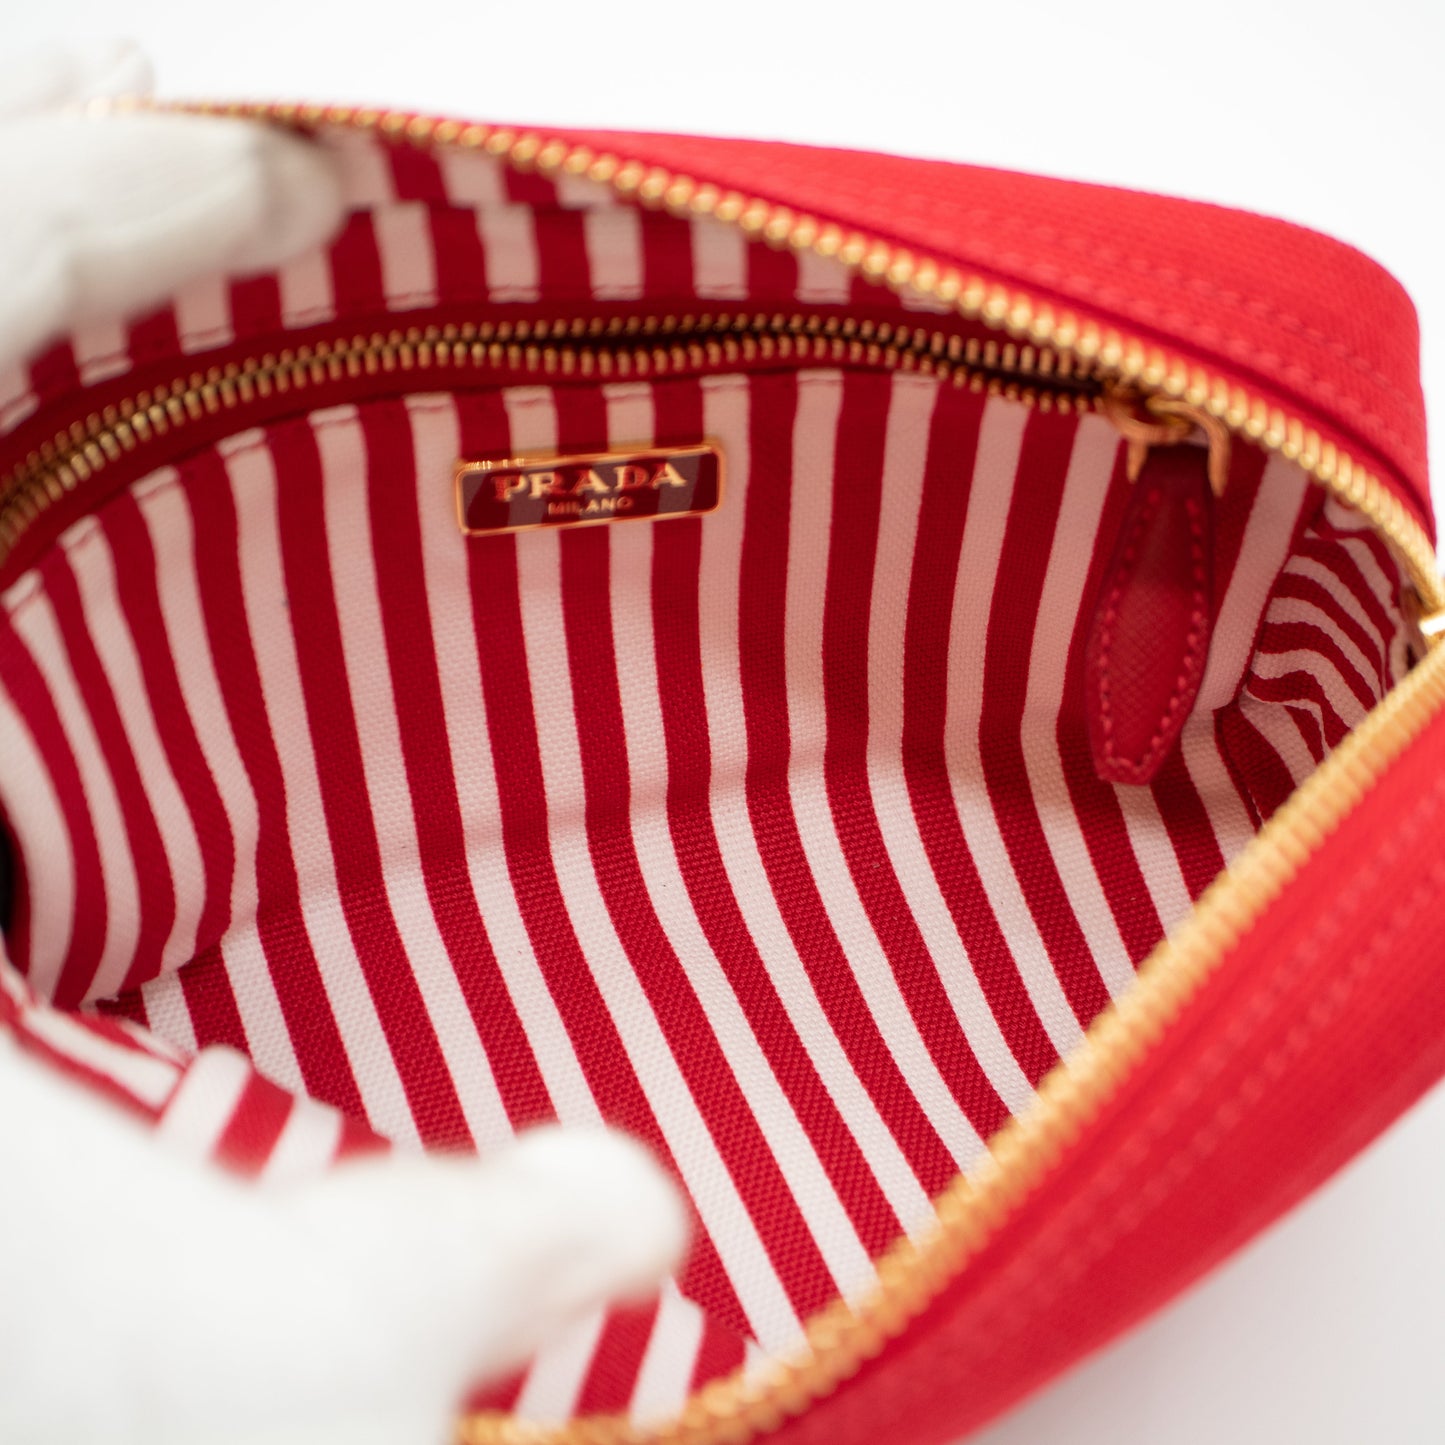 Canapa Cosmetic Pouch Red Hemp